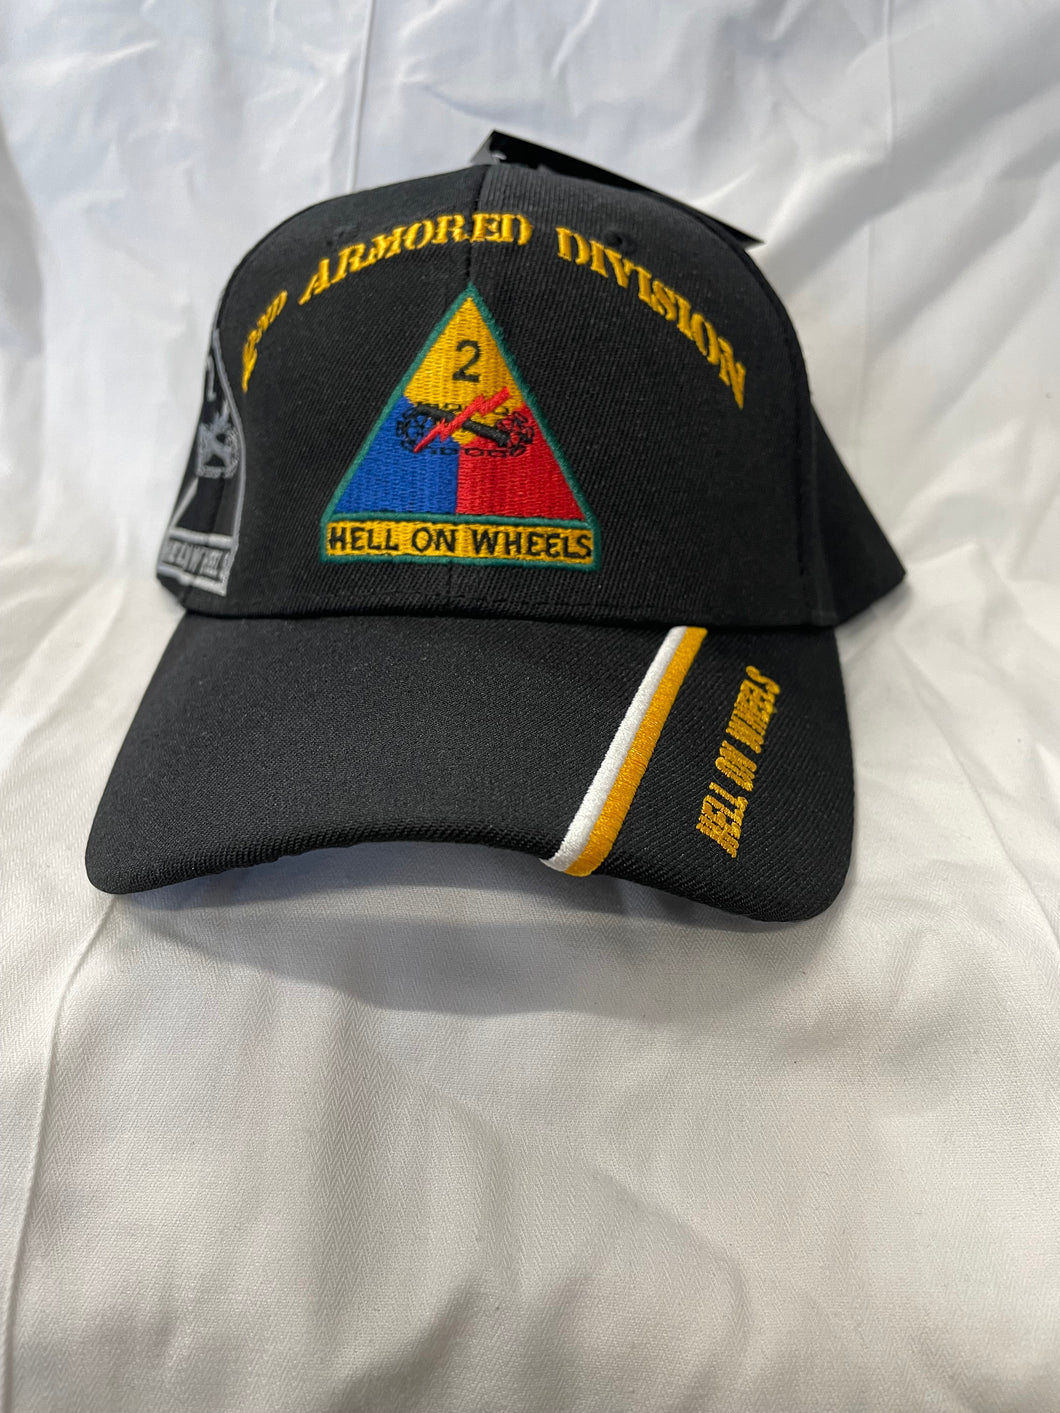 FRONT OF SECOND ARMORED DIVISION HAT